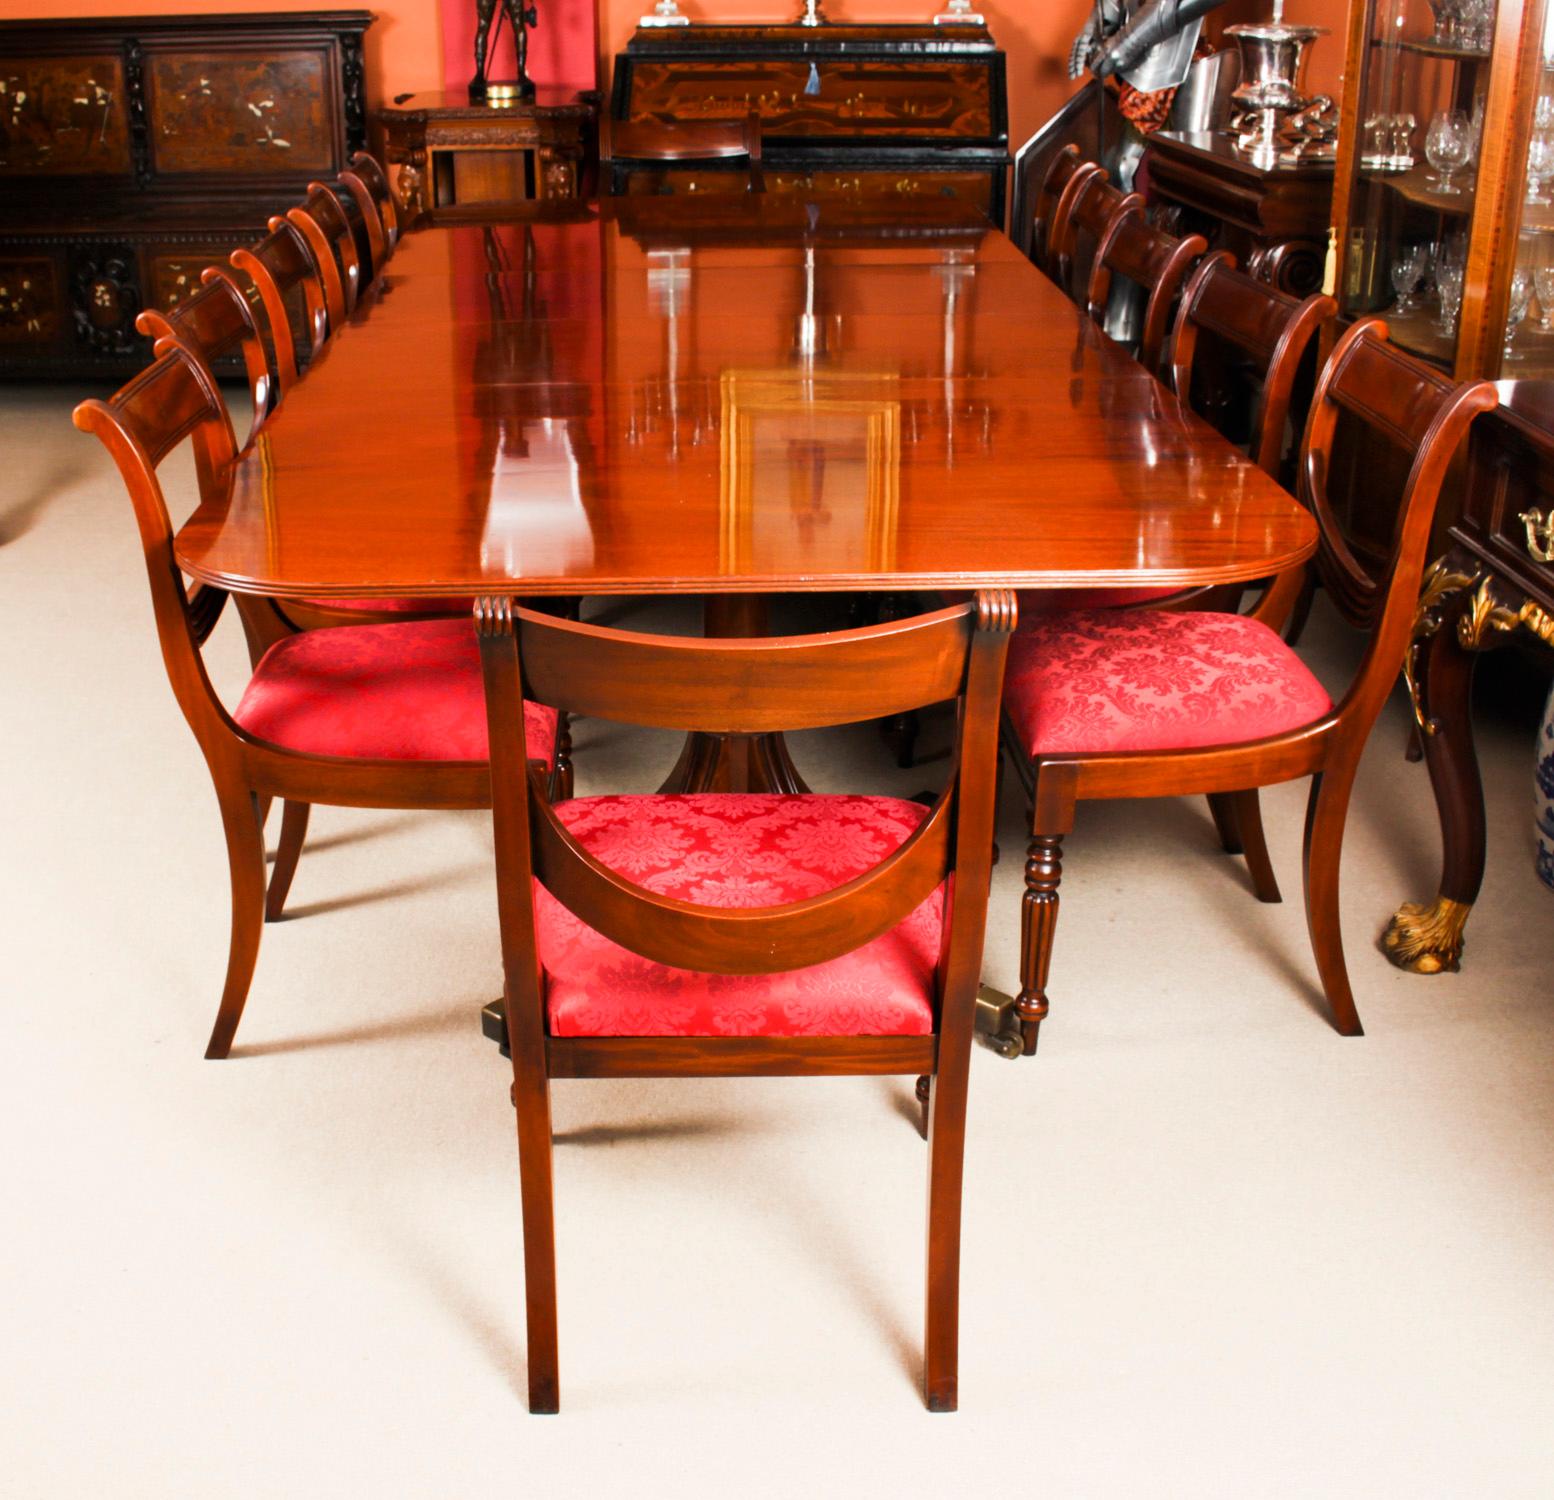 This is fabulous Vintage dining set comprising a Regency Revival dining table by William Tillman and a set of twelve Regency Revival Swag back dining chairs, Circa 1980 in date

The table is made of stunning solid flame mahogany and is raised on